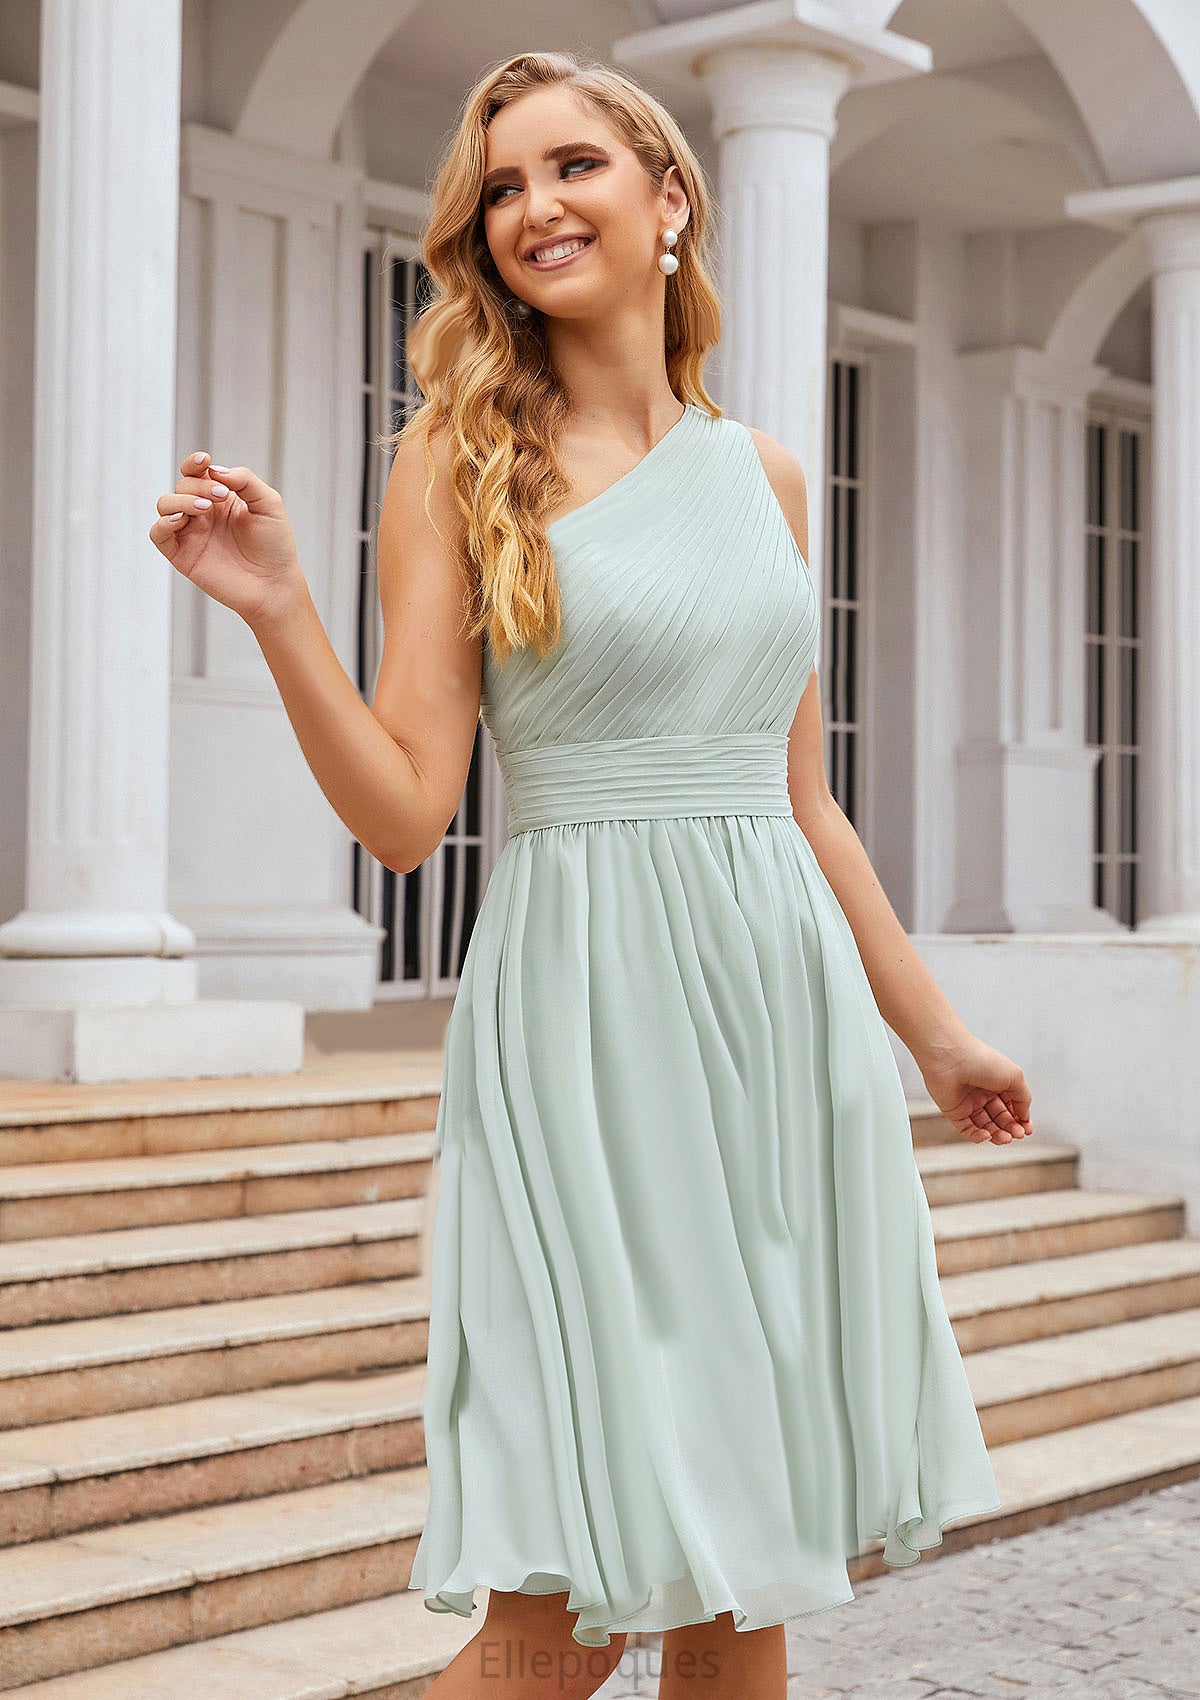 A-line One-Shoulder Sleeveless Chiffon Knee-Length Bridesmaid Dresses With Pleated Genesis HOP0025379